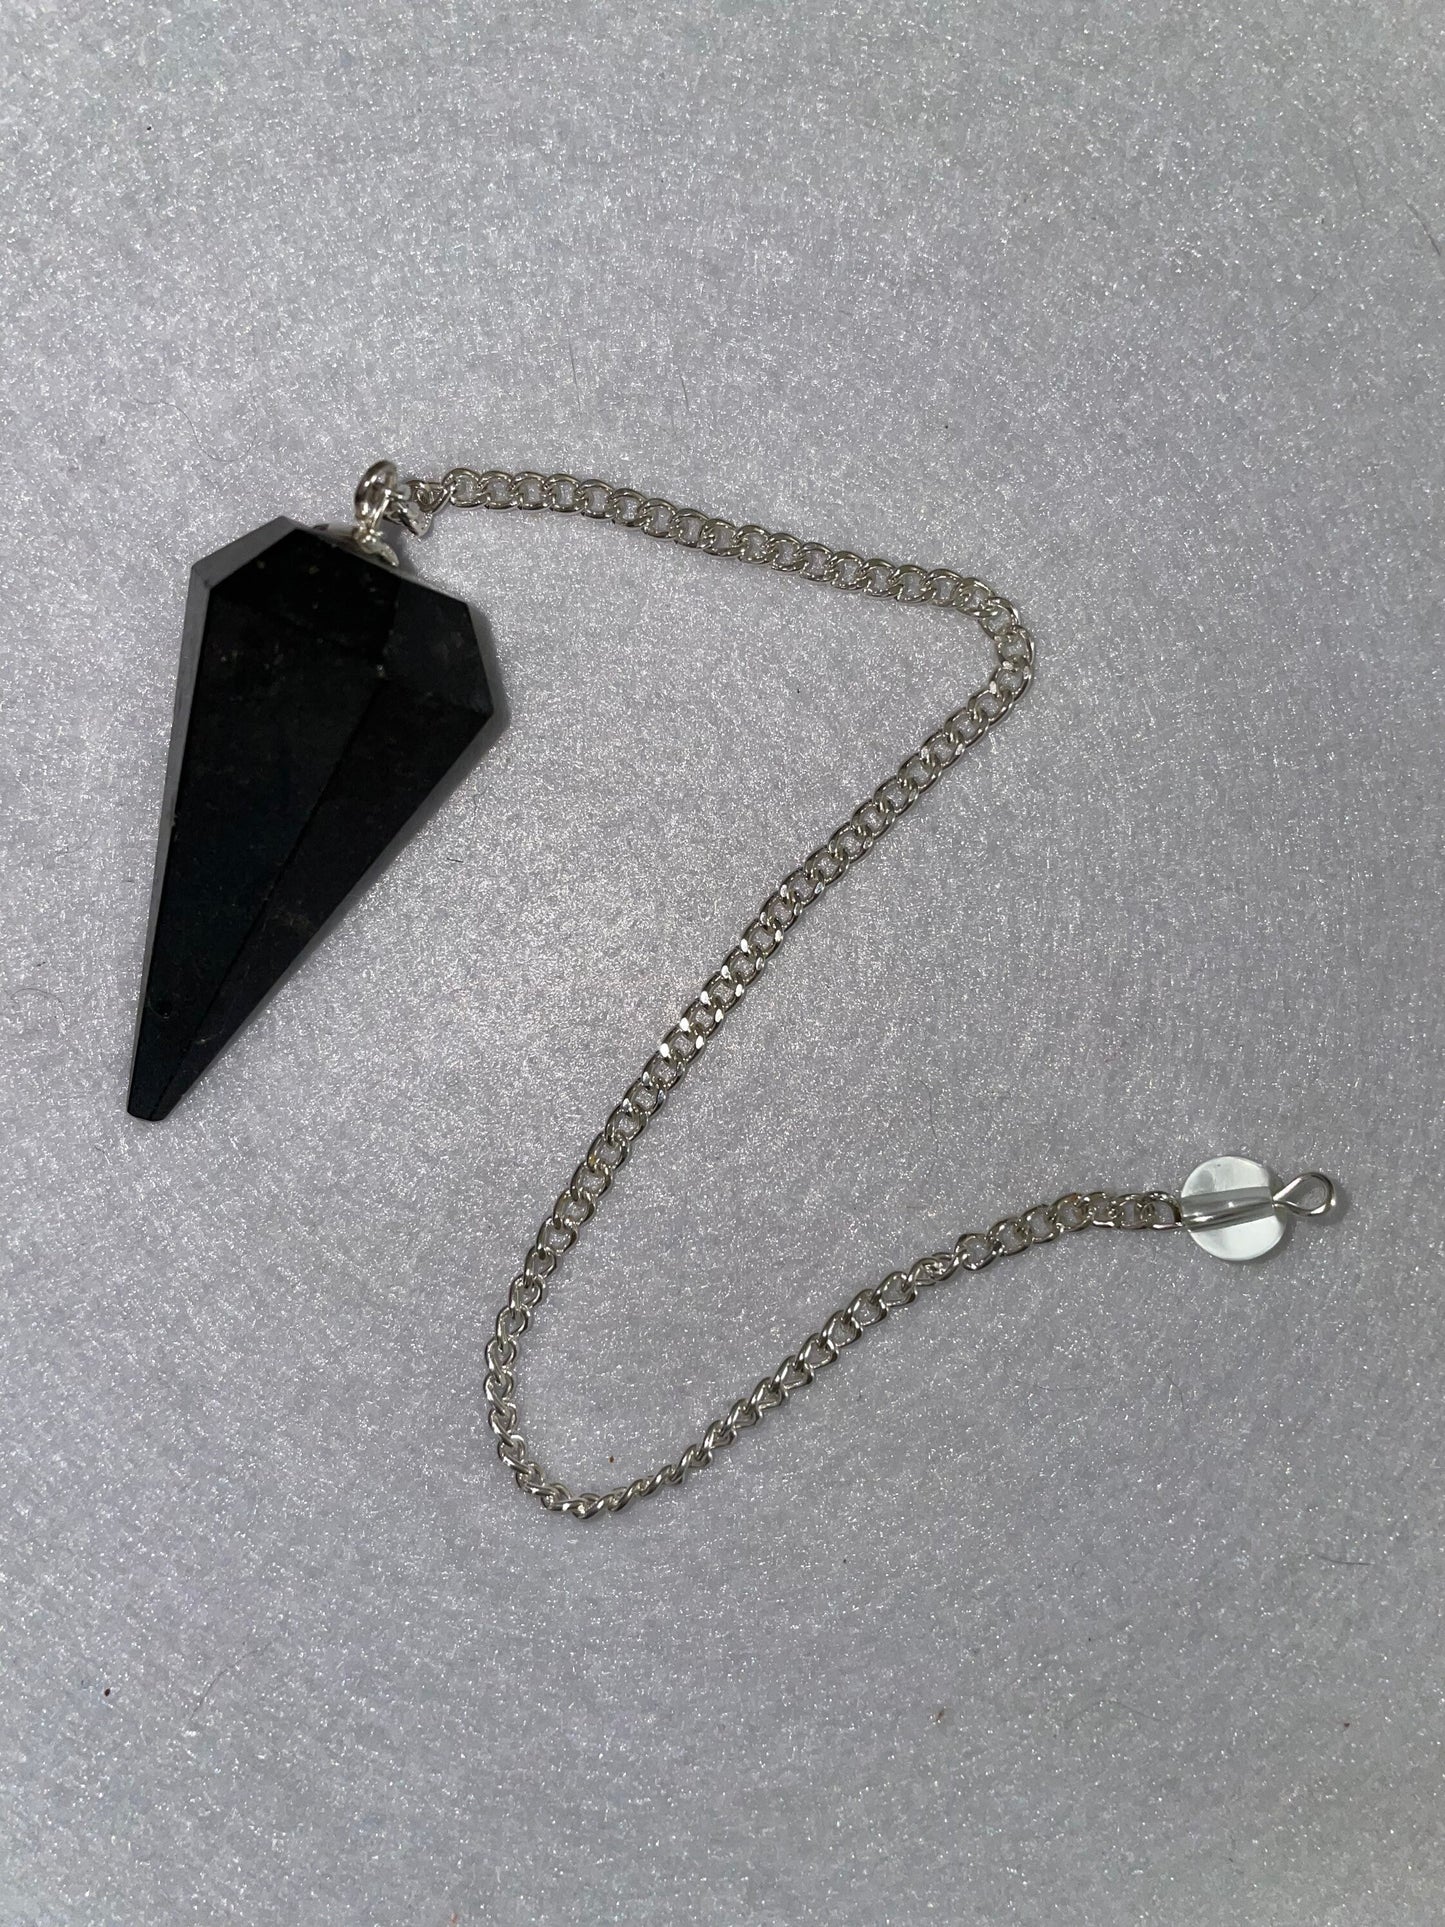 Black Obsidian Pendulum is  1.65” and with chain is 8.5”